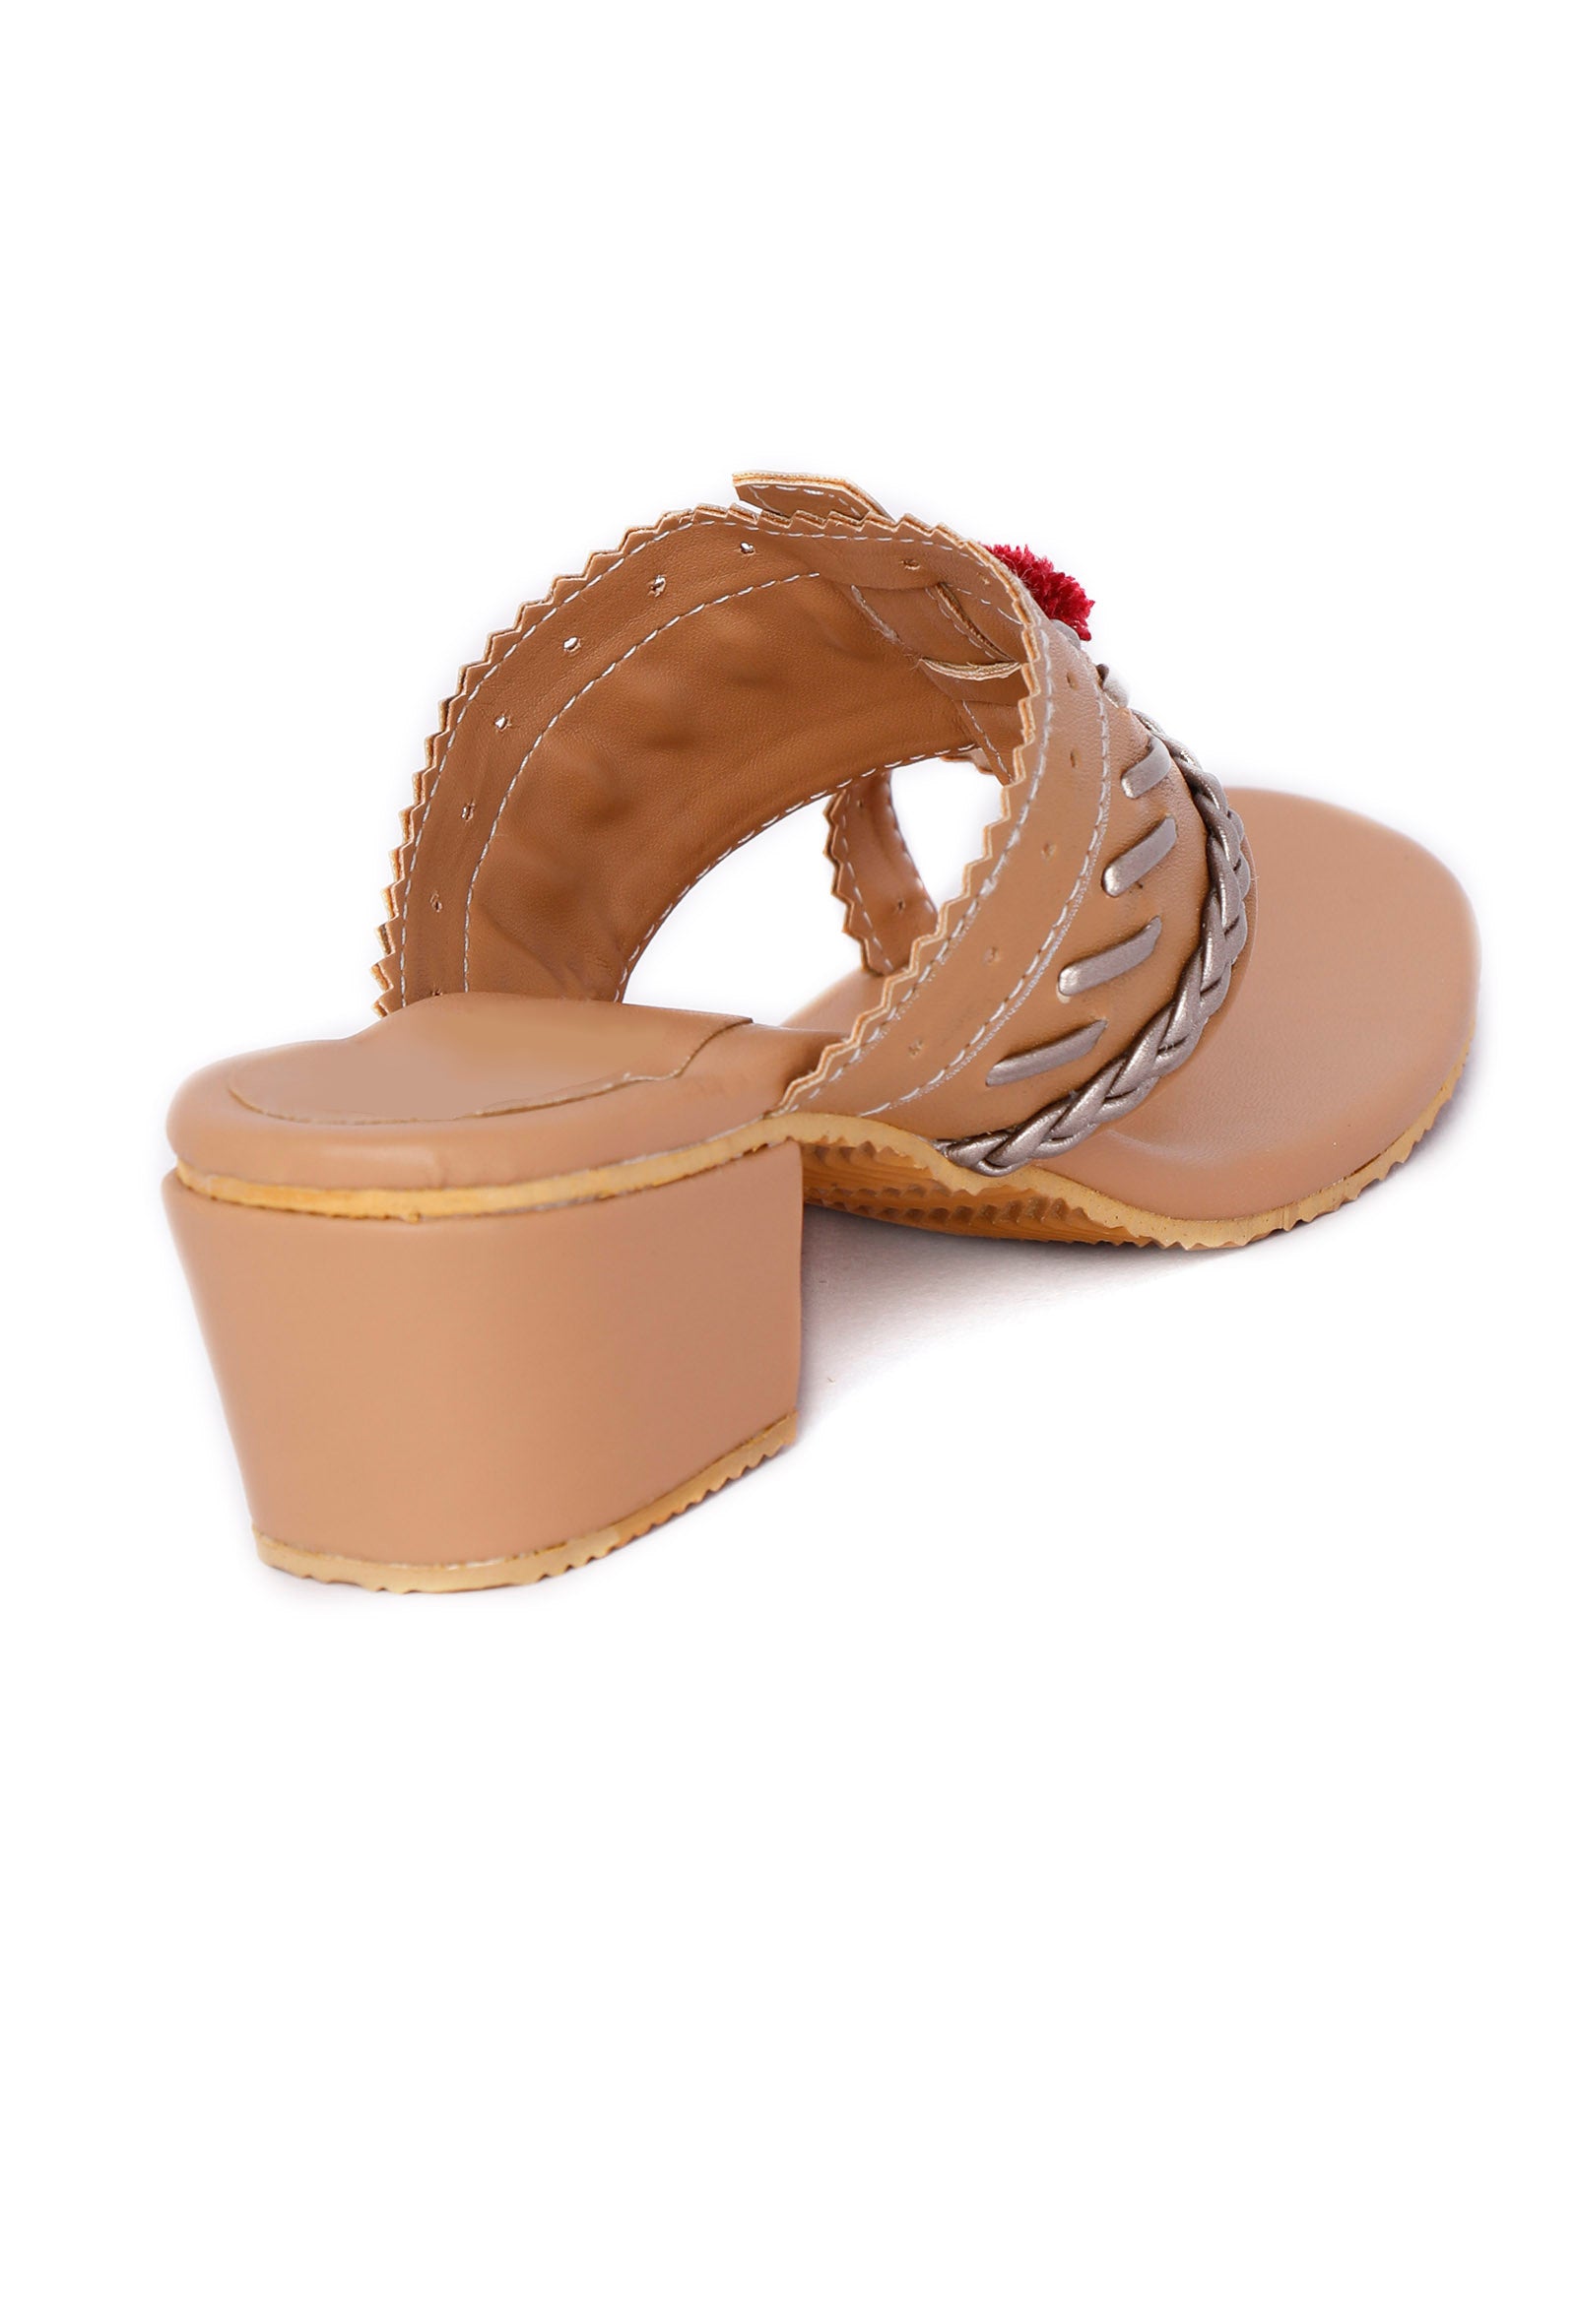 Tan and Silver Cruelty Free Leather Heels with Pom Poms